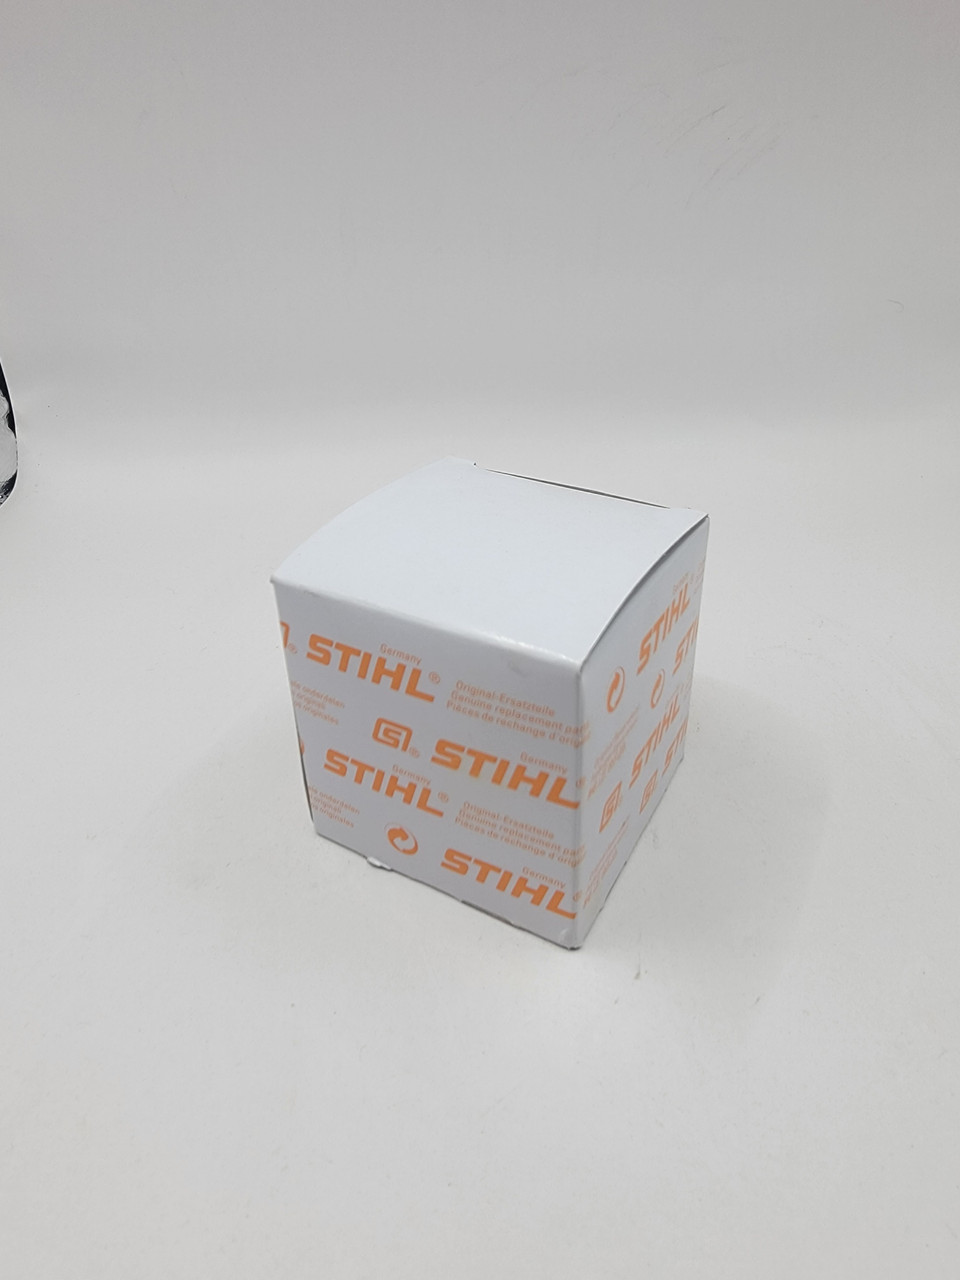 Stihl 4313 790 5601 HANDLE FRAME BT 130 one package